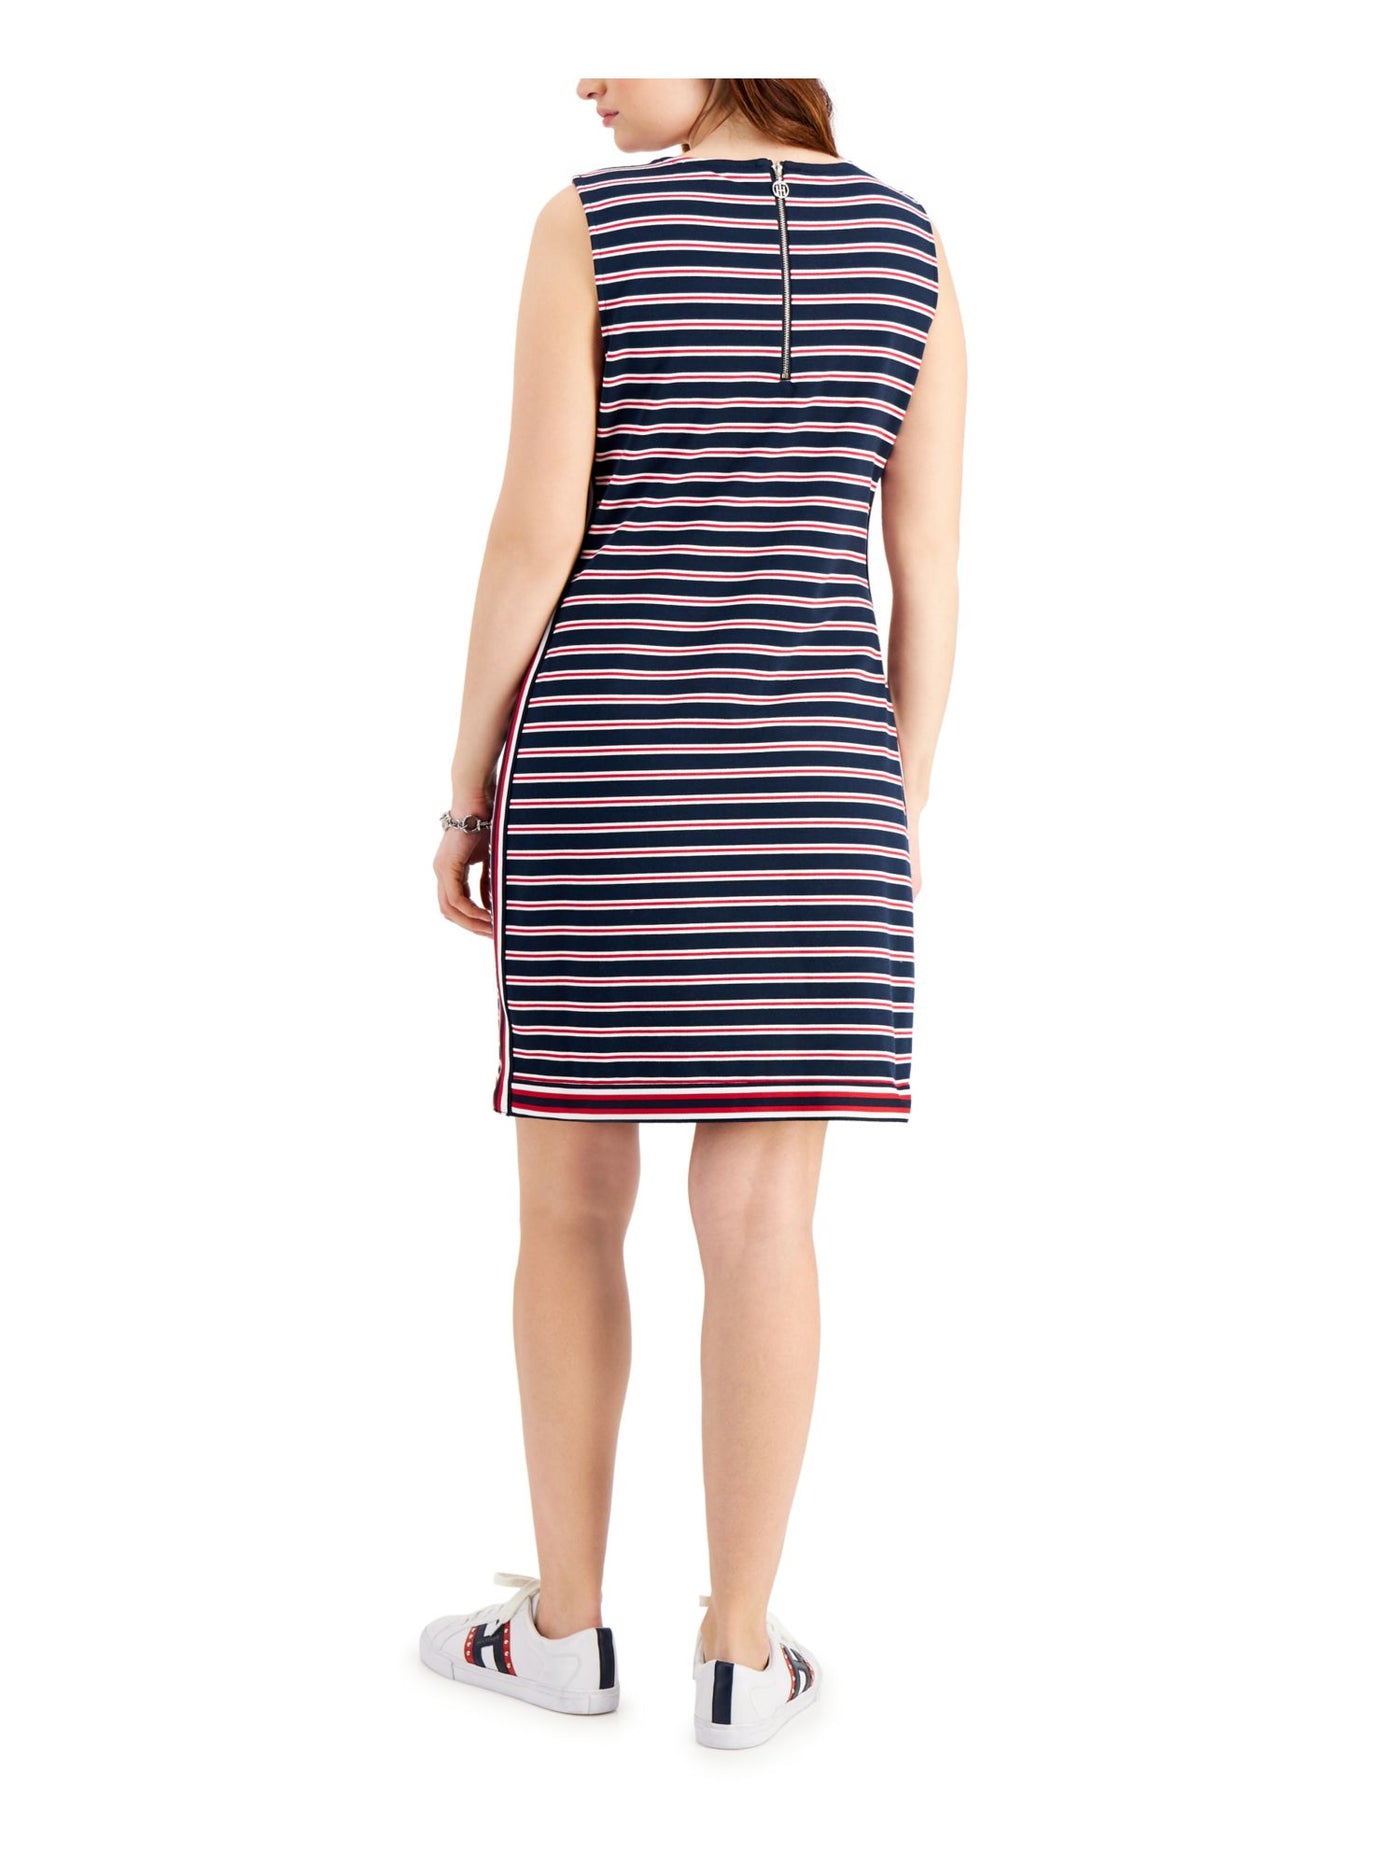 TOMMY HILFIGER Womens Navy Zippered Fitted Unlined Striped Sleeveless Round Neck Above The Knee Shift Dress S